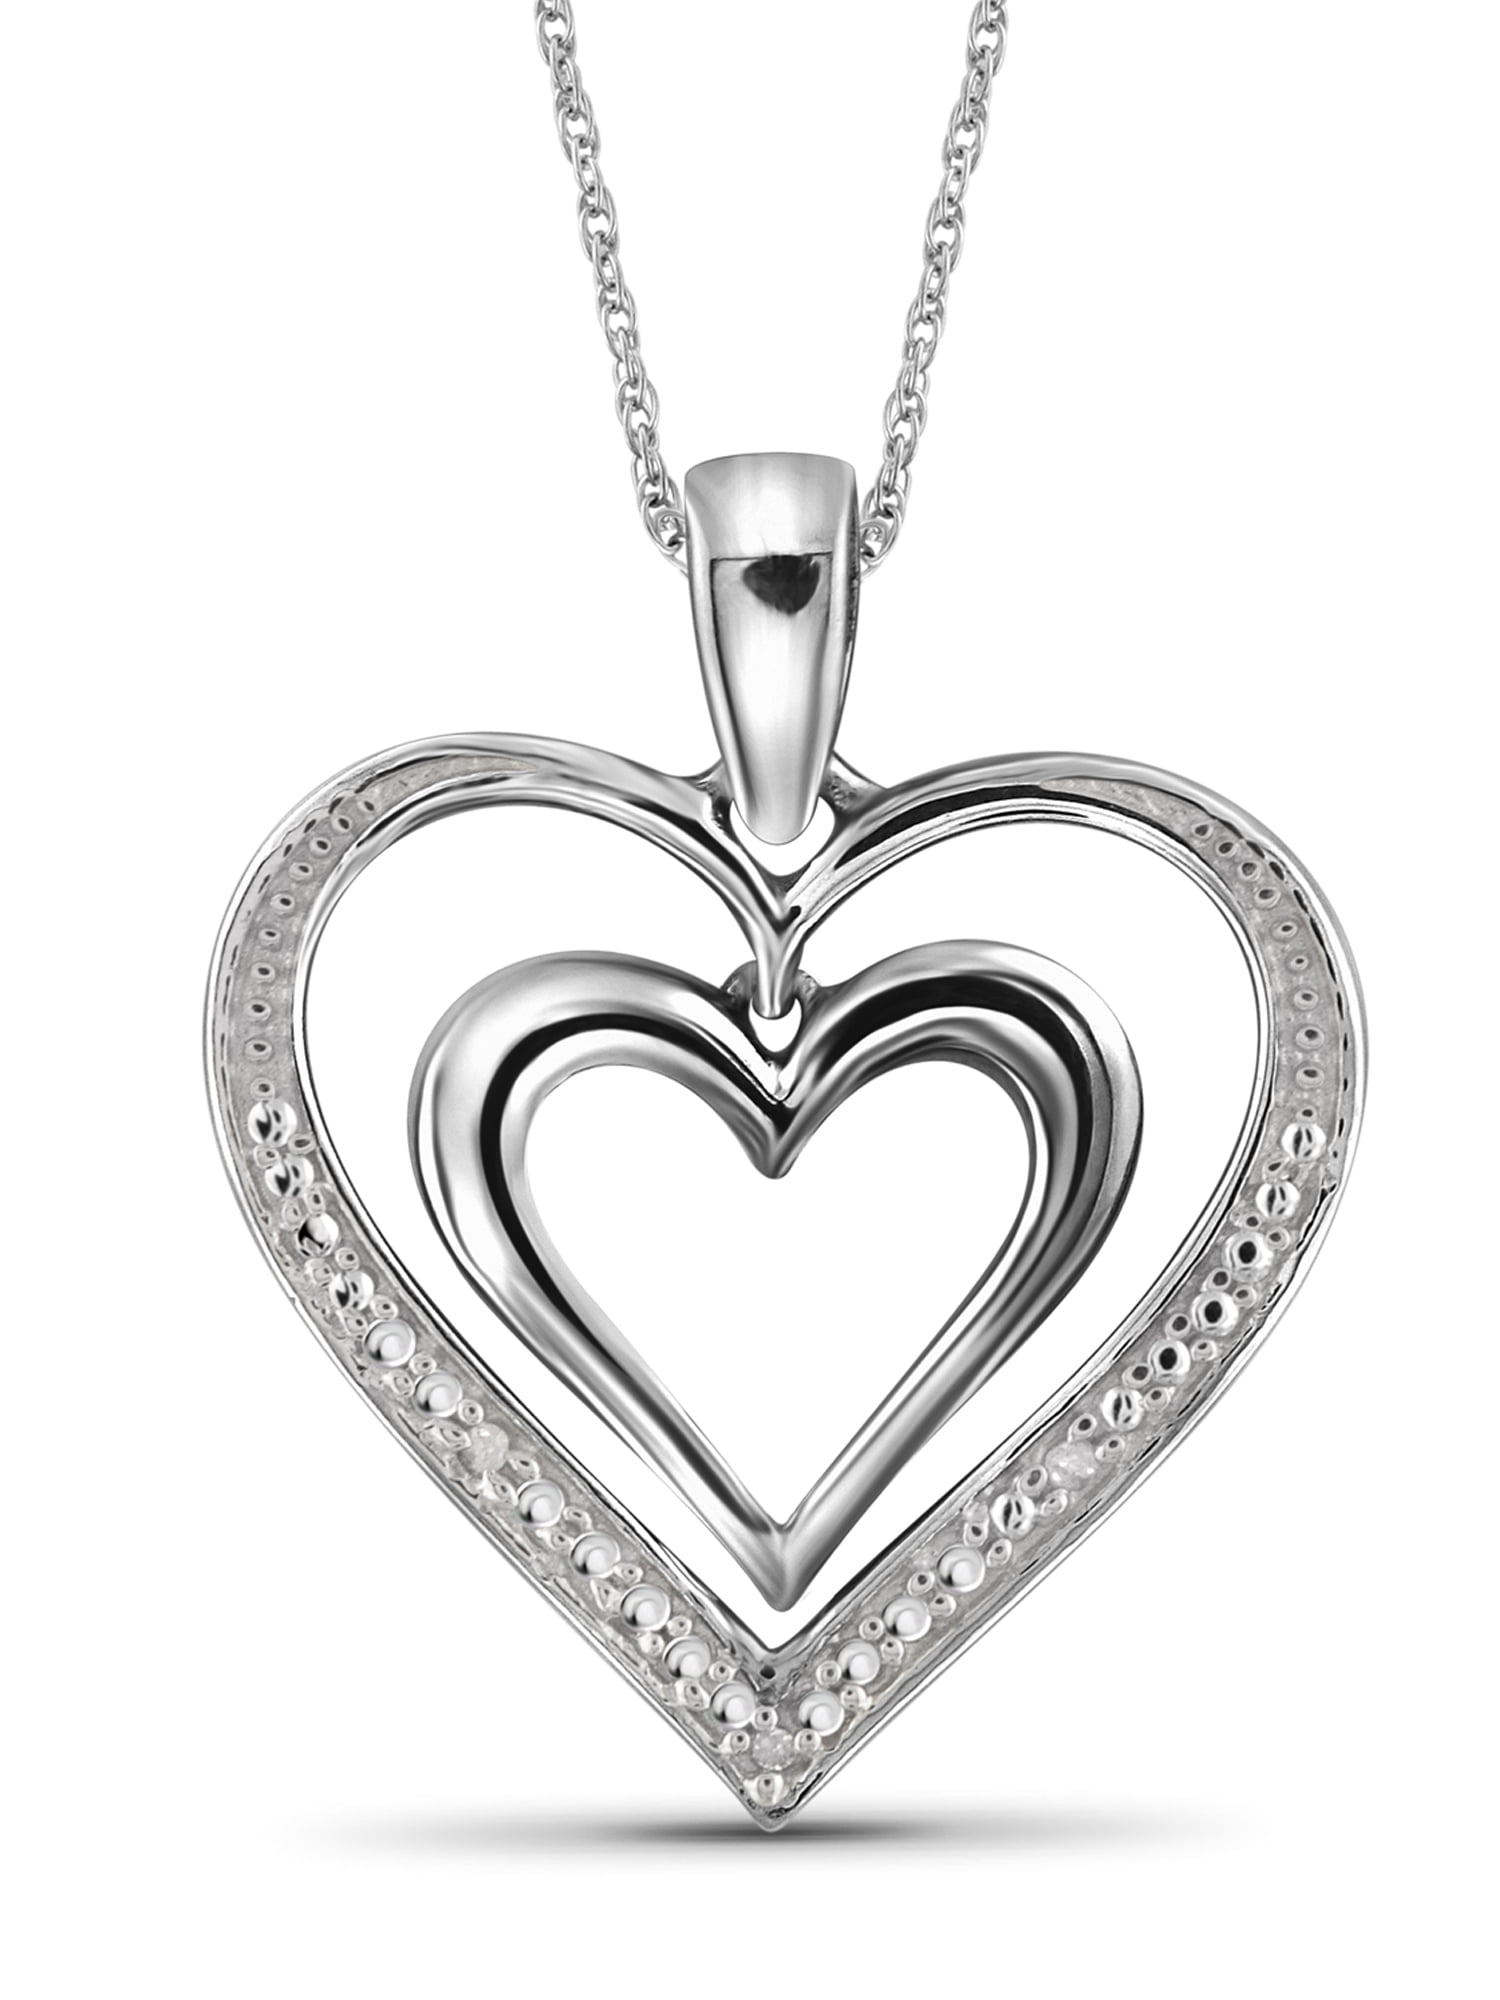 JewelersClub 0.925 Sterling Silver Heart Necklace with 0.10 Carat White  Diamonds | Jewelry Pendant Necklaces for Women White Diamonds & 18 inch  Rope Chain with Spring Clasp